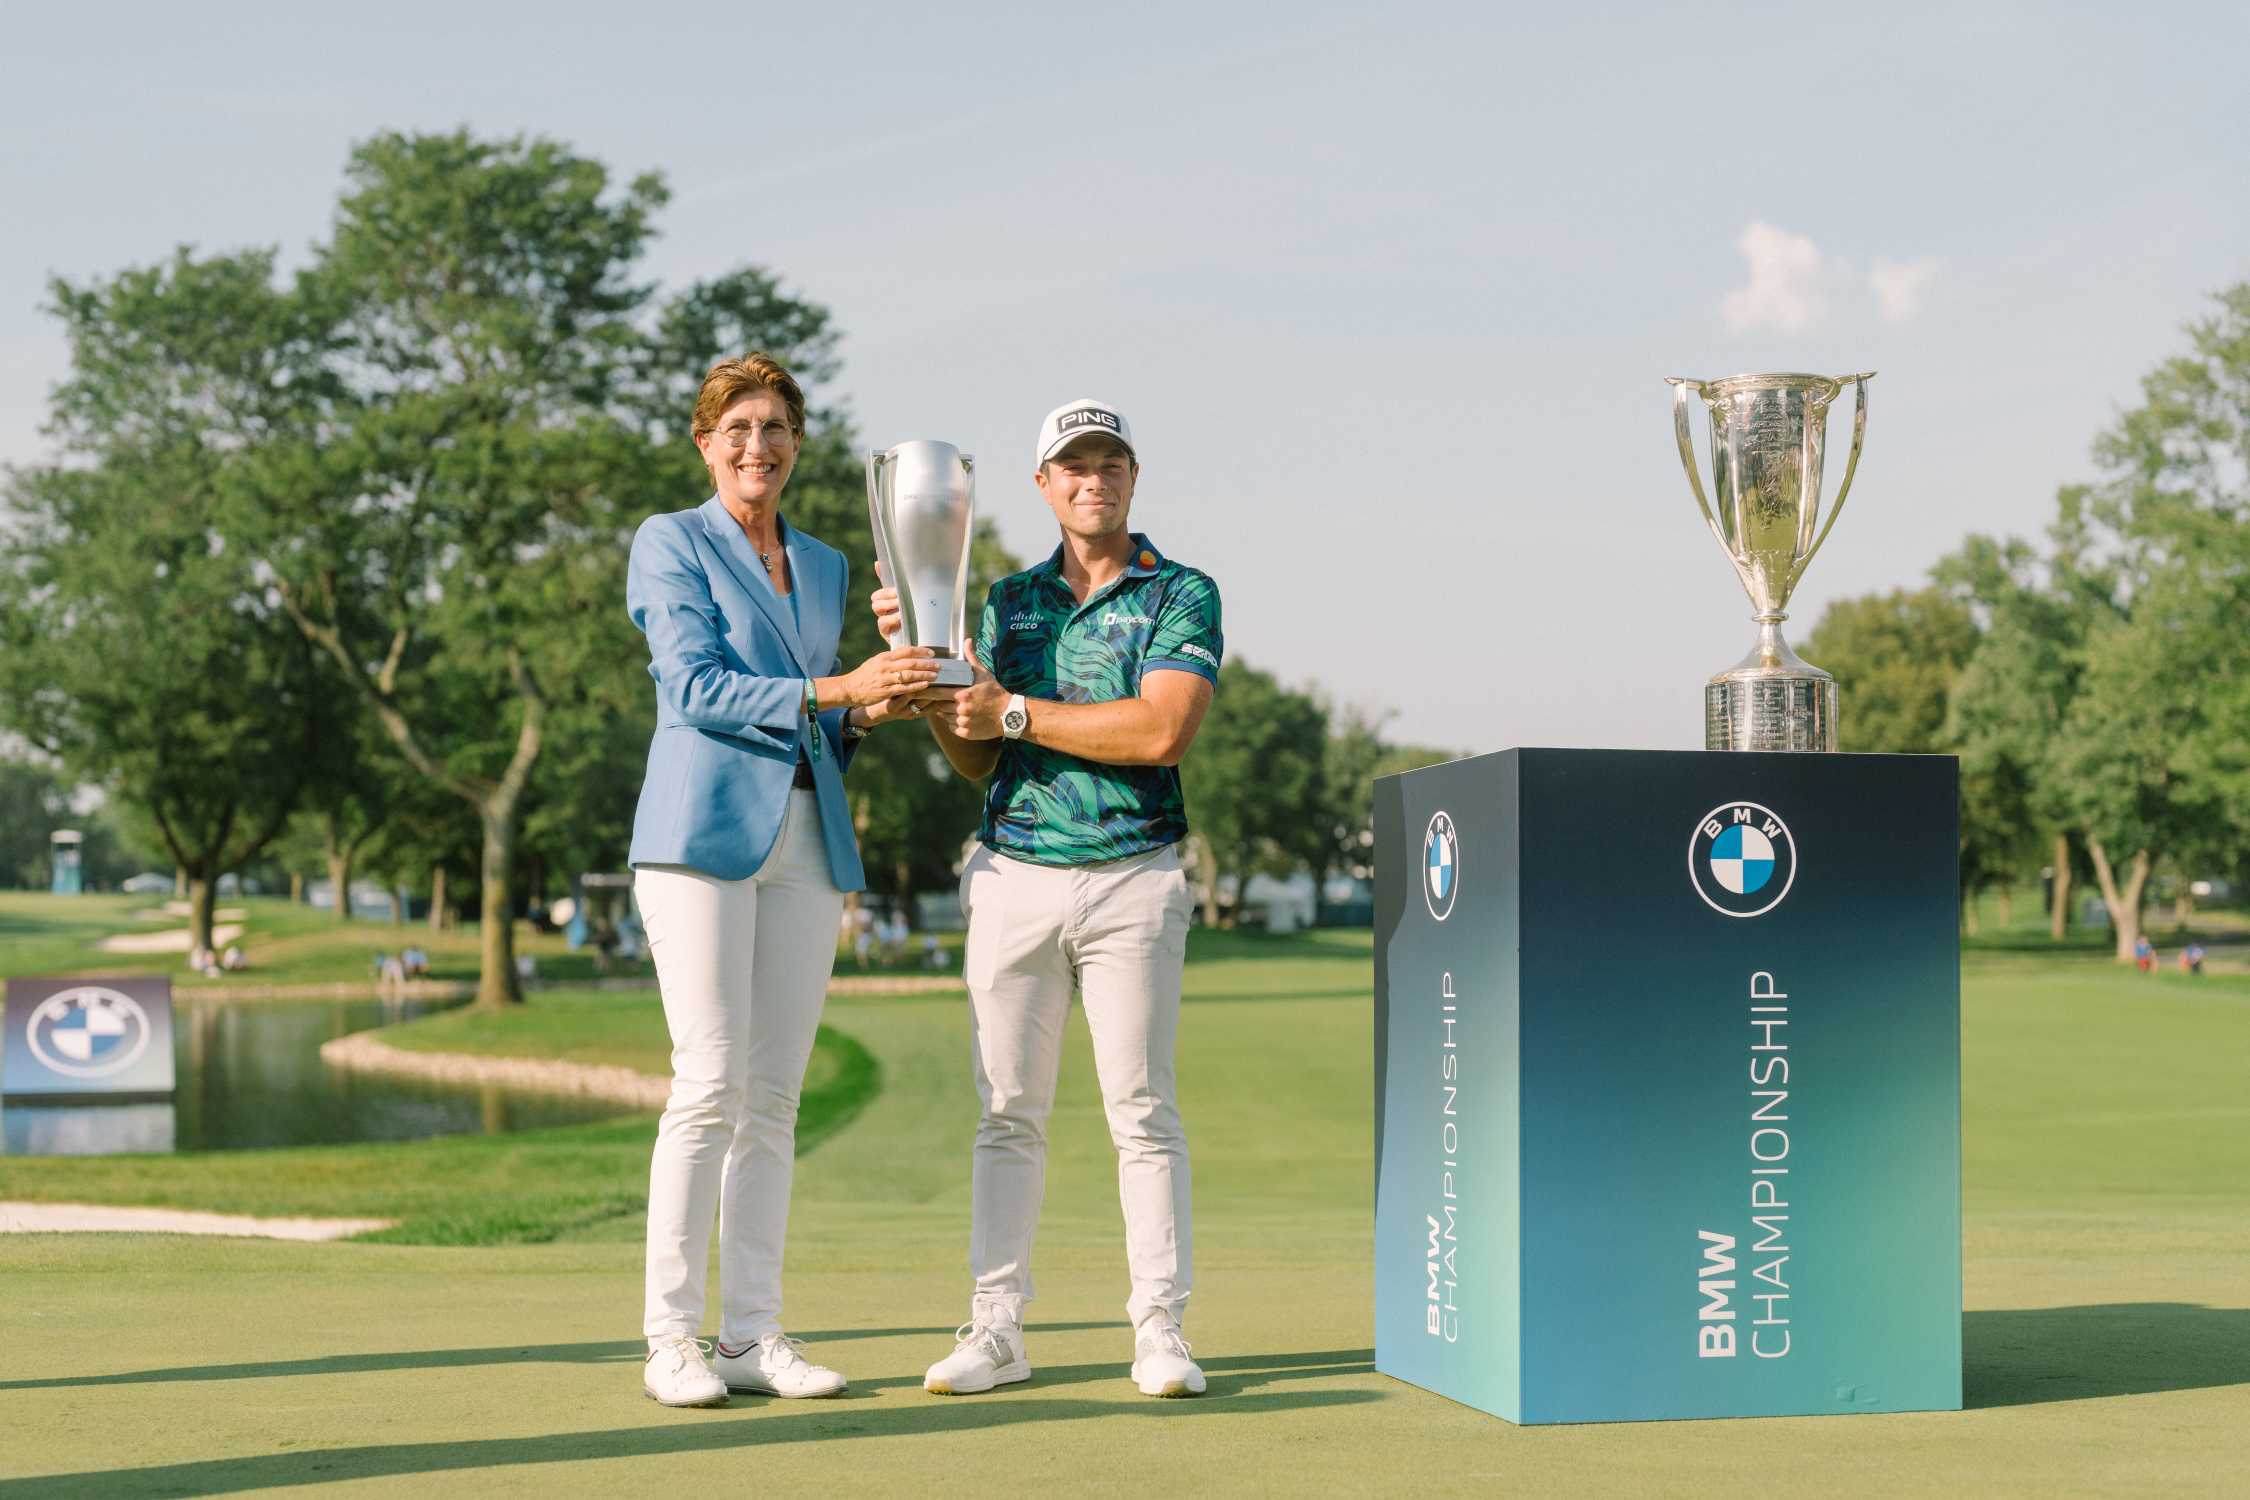 Viktor Hovland Wins the 2023 BMW Championship at Olympia Fields Country Club after Shooting a Course-Record 61 in Final Round.